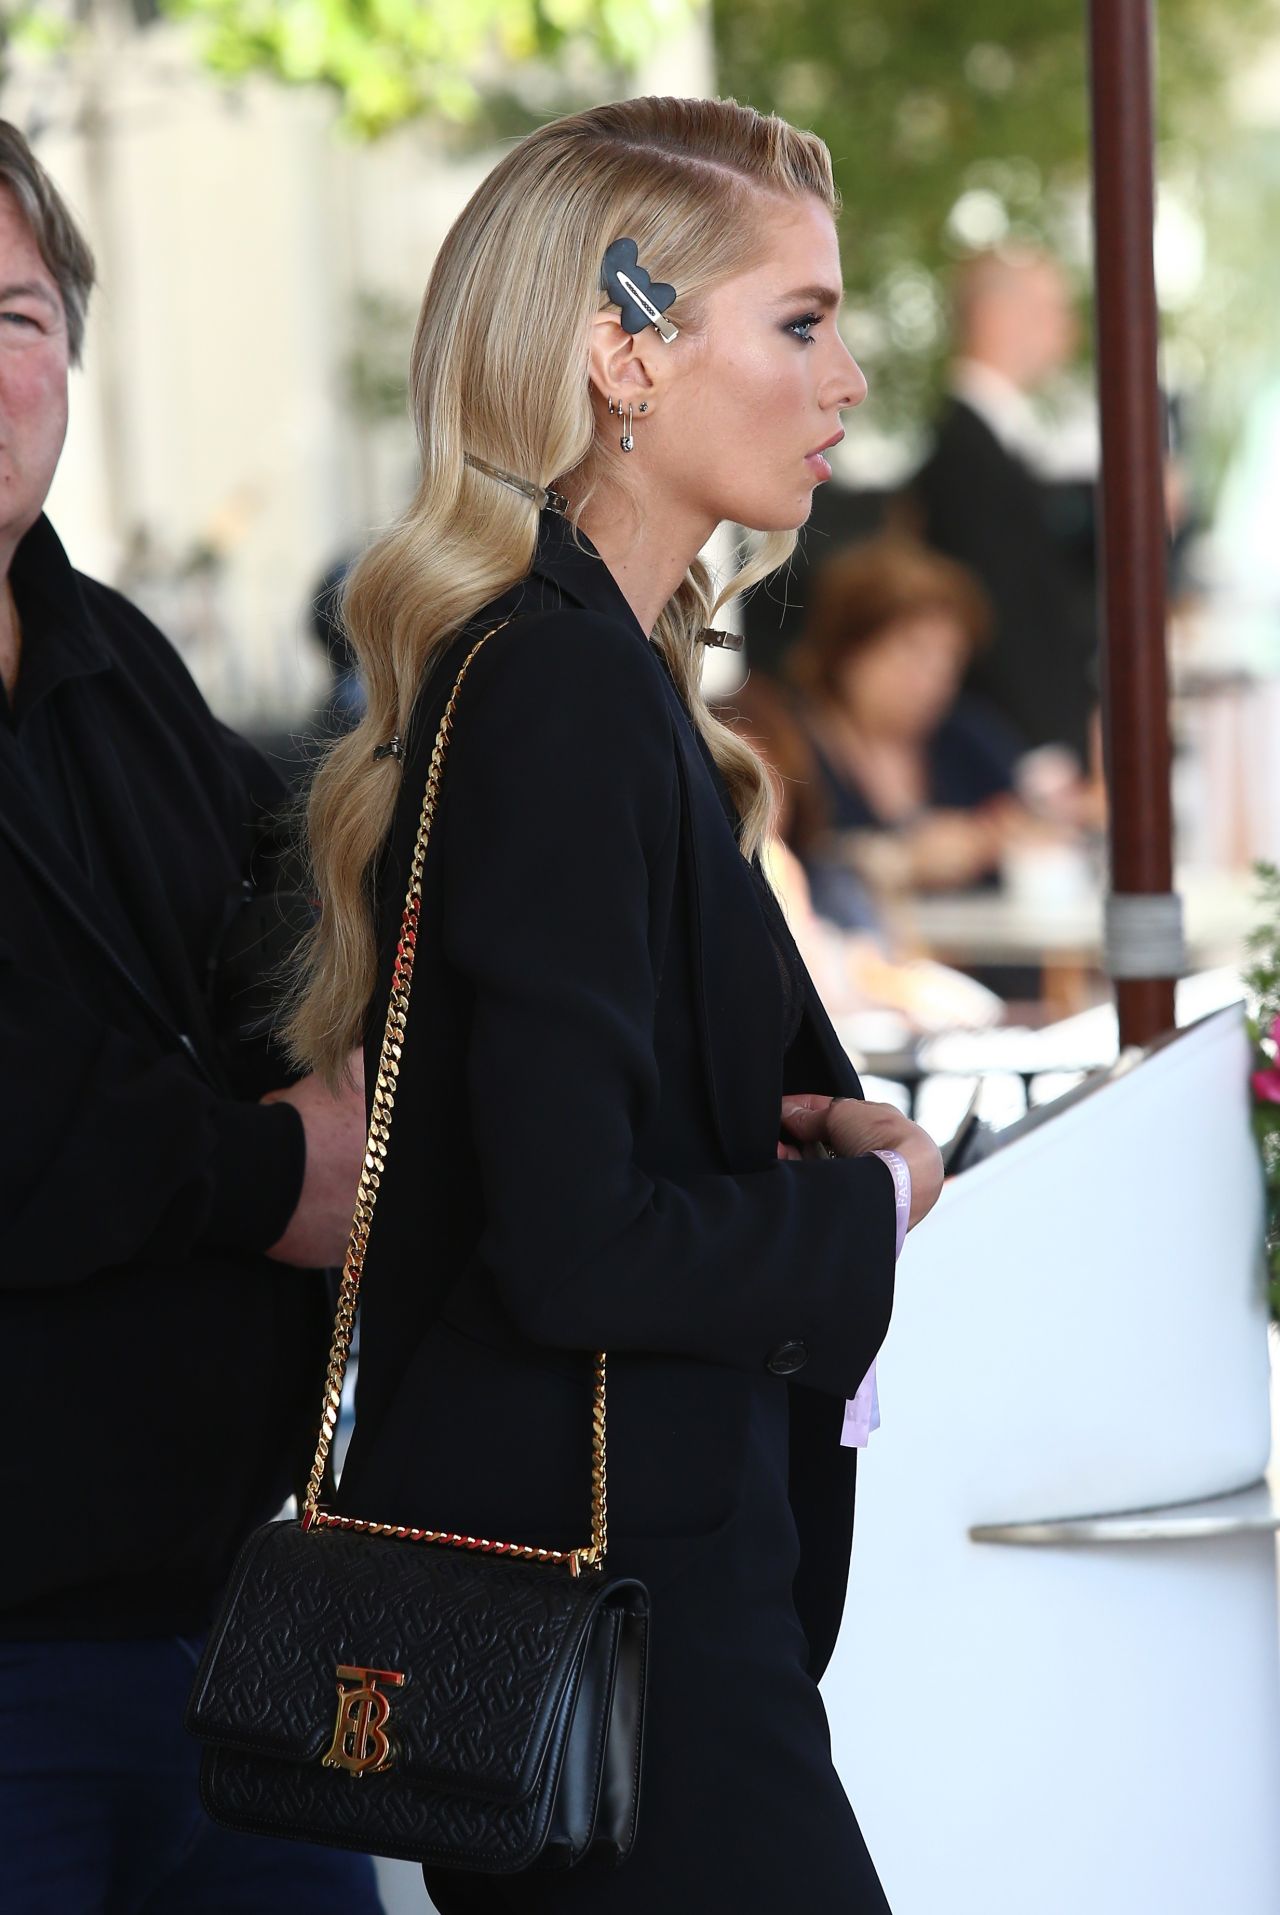 stella-maxwell-leaving-the-martinez-in-cannes-05-23-2019-11.jpg